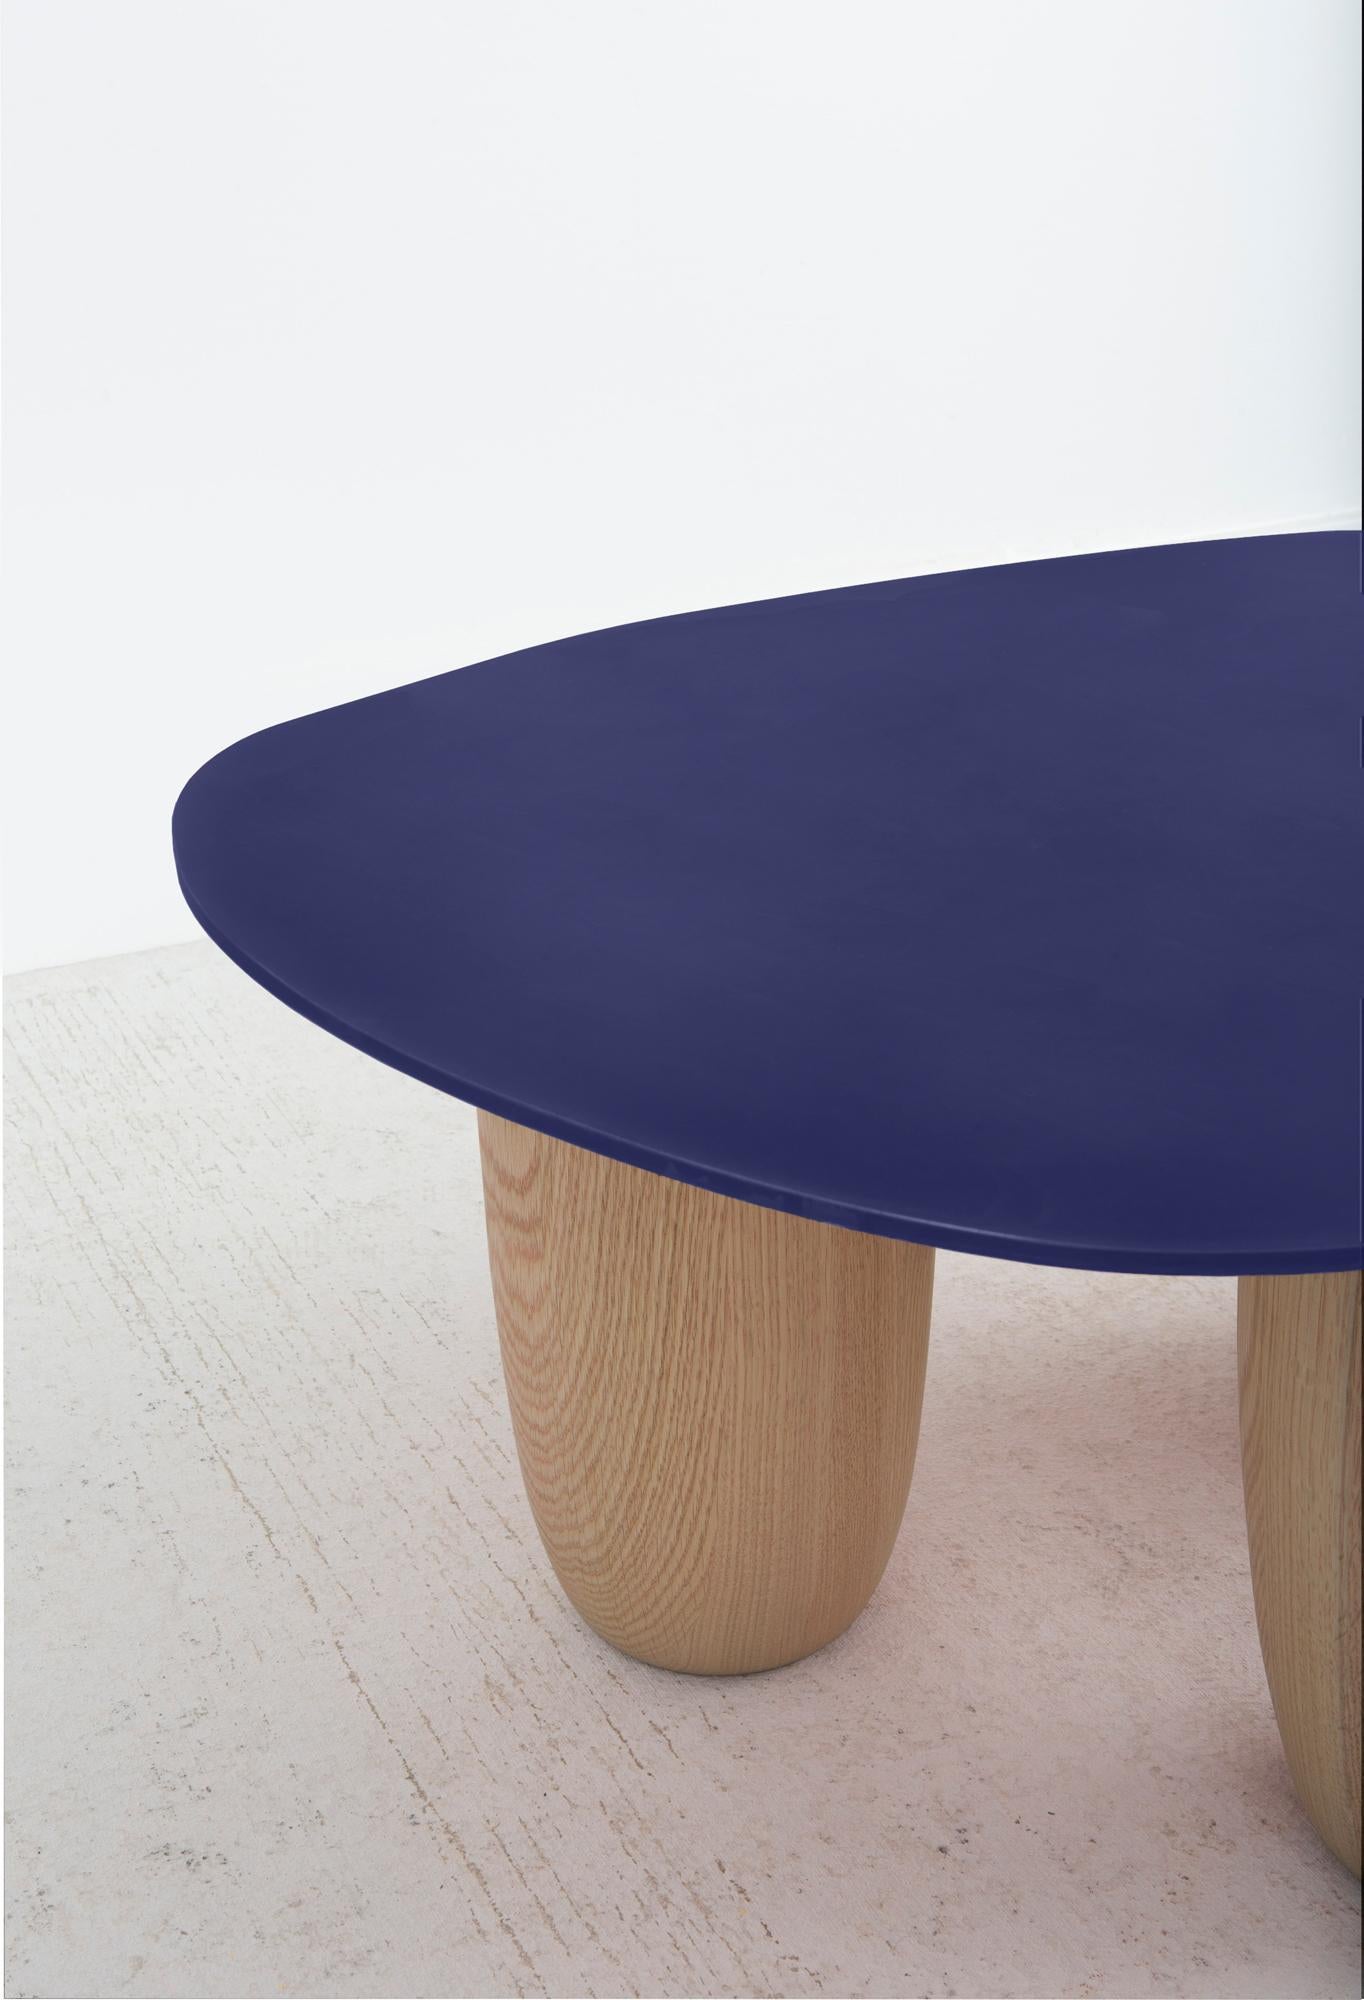 American Contemporary Low Table Blue Steel and Natural Oak Legs by Vivian Carbonell For Sale